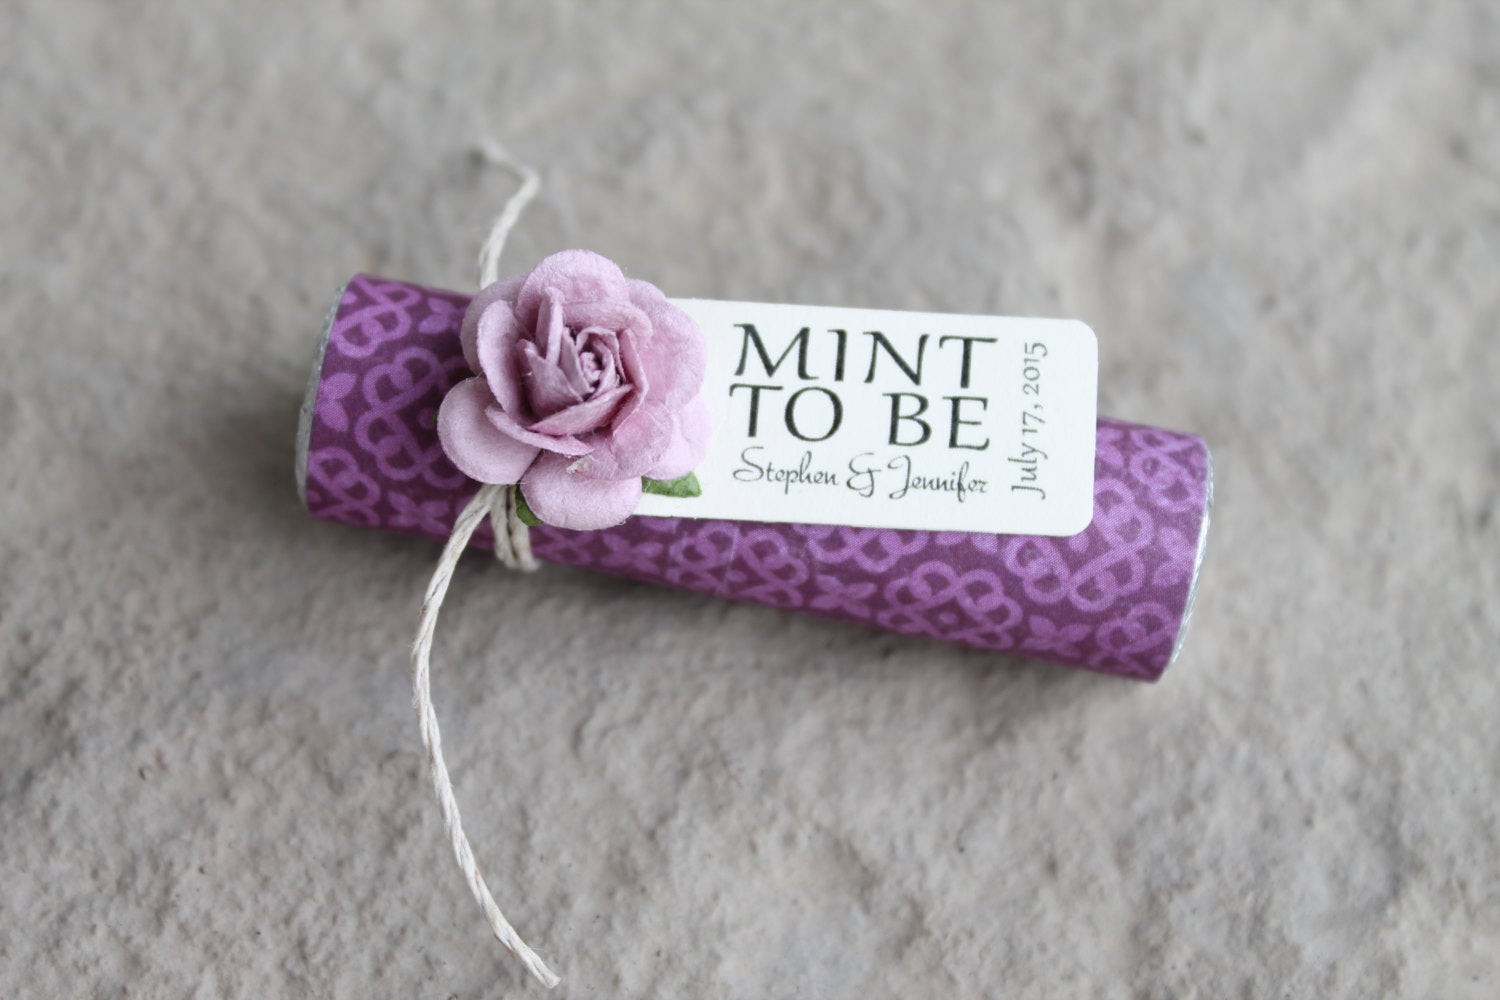 Purple Wedding Favors
 24 Purple wedding favors with a personalized tag custom